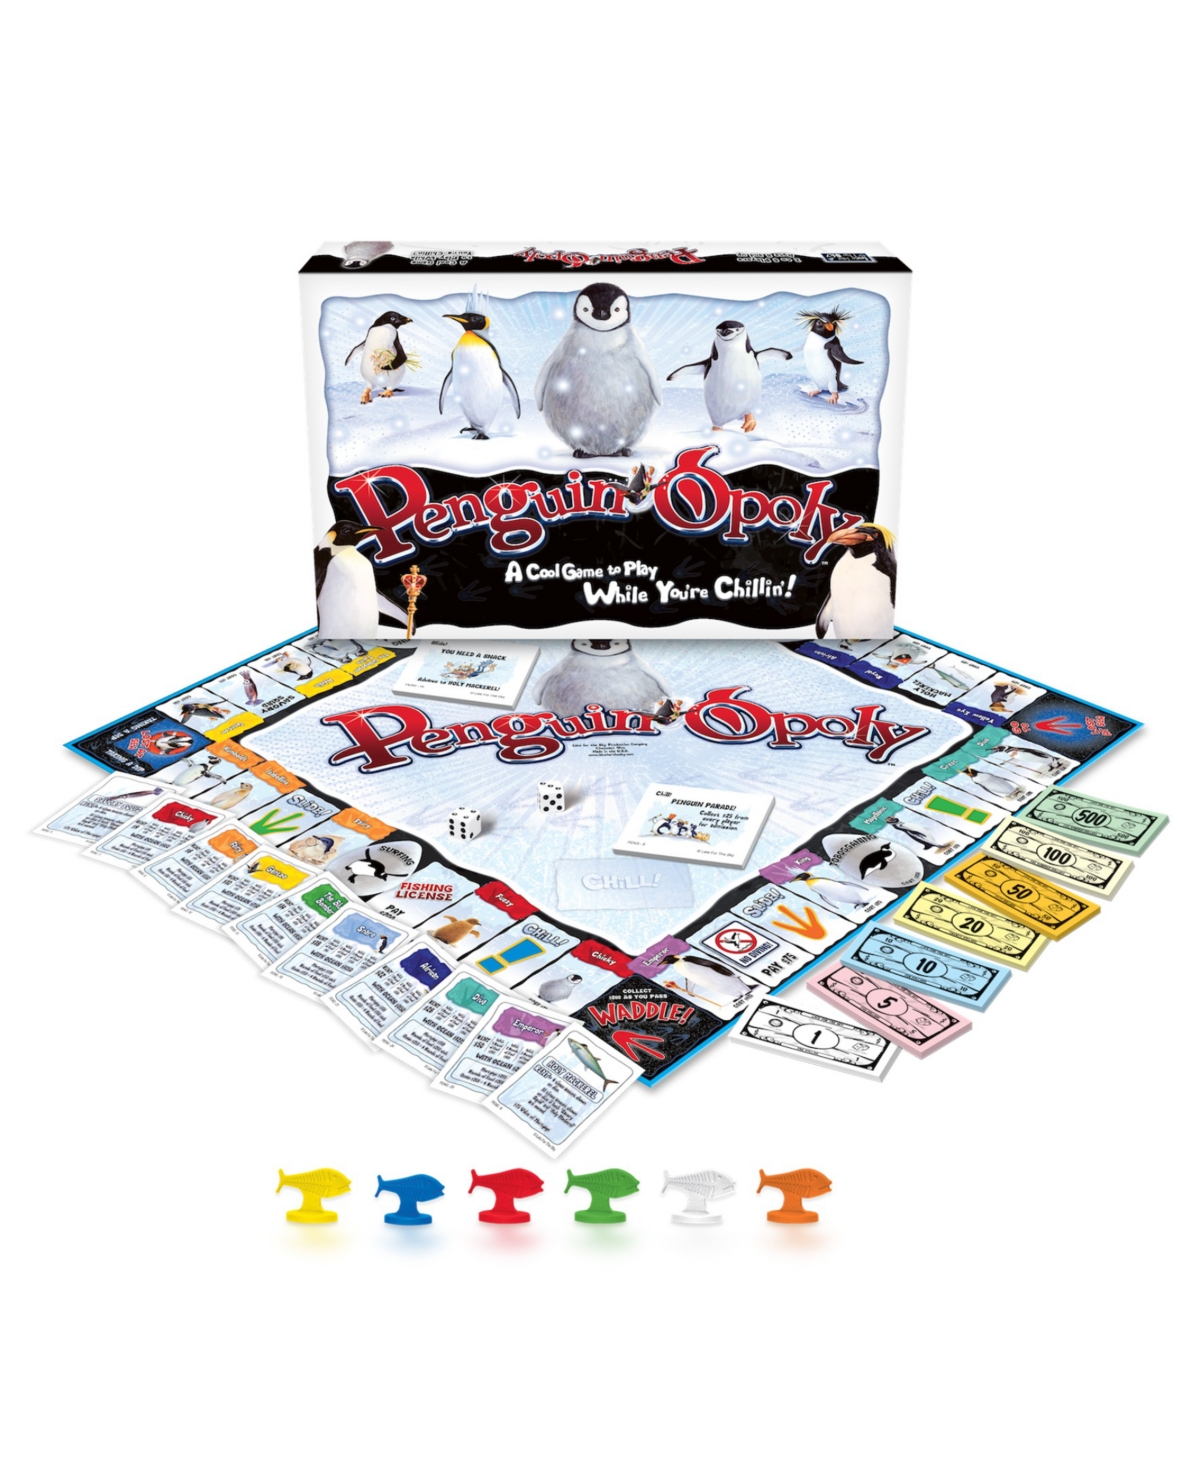 Late For The Sky Penguin-opoly Board Game In Multi